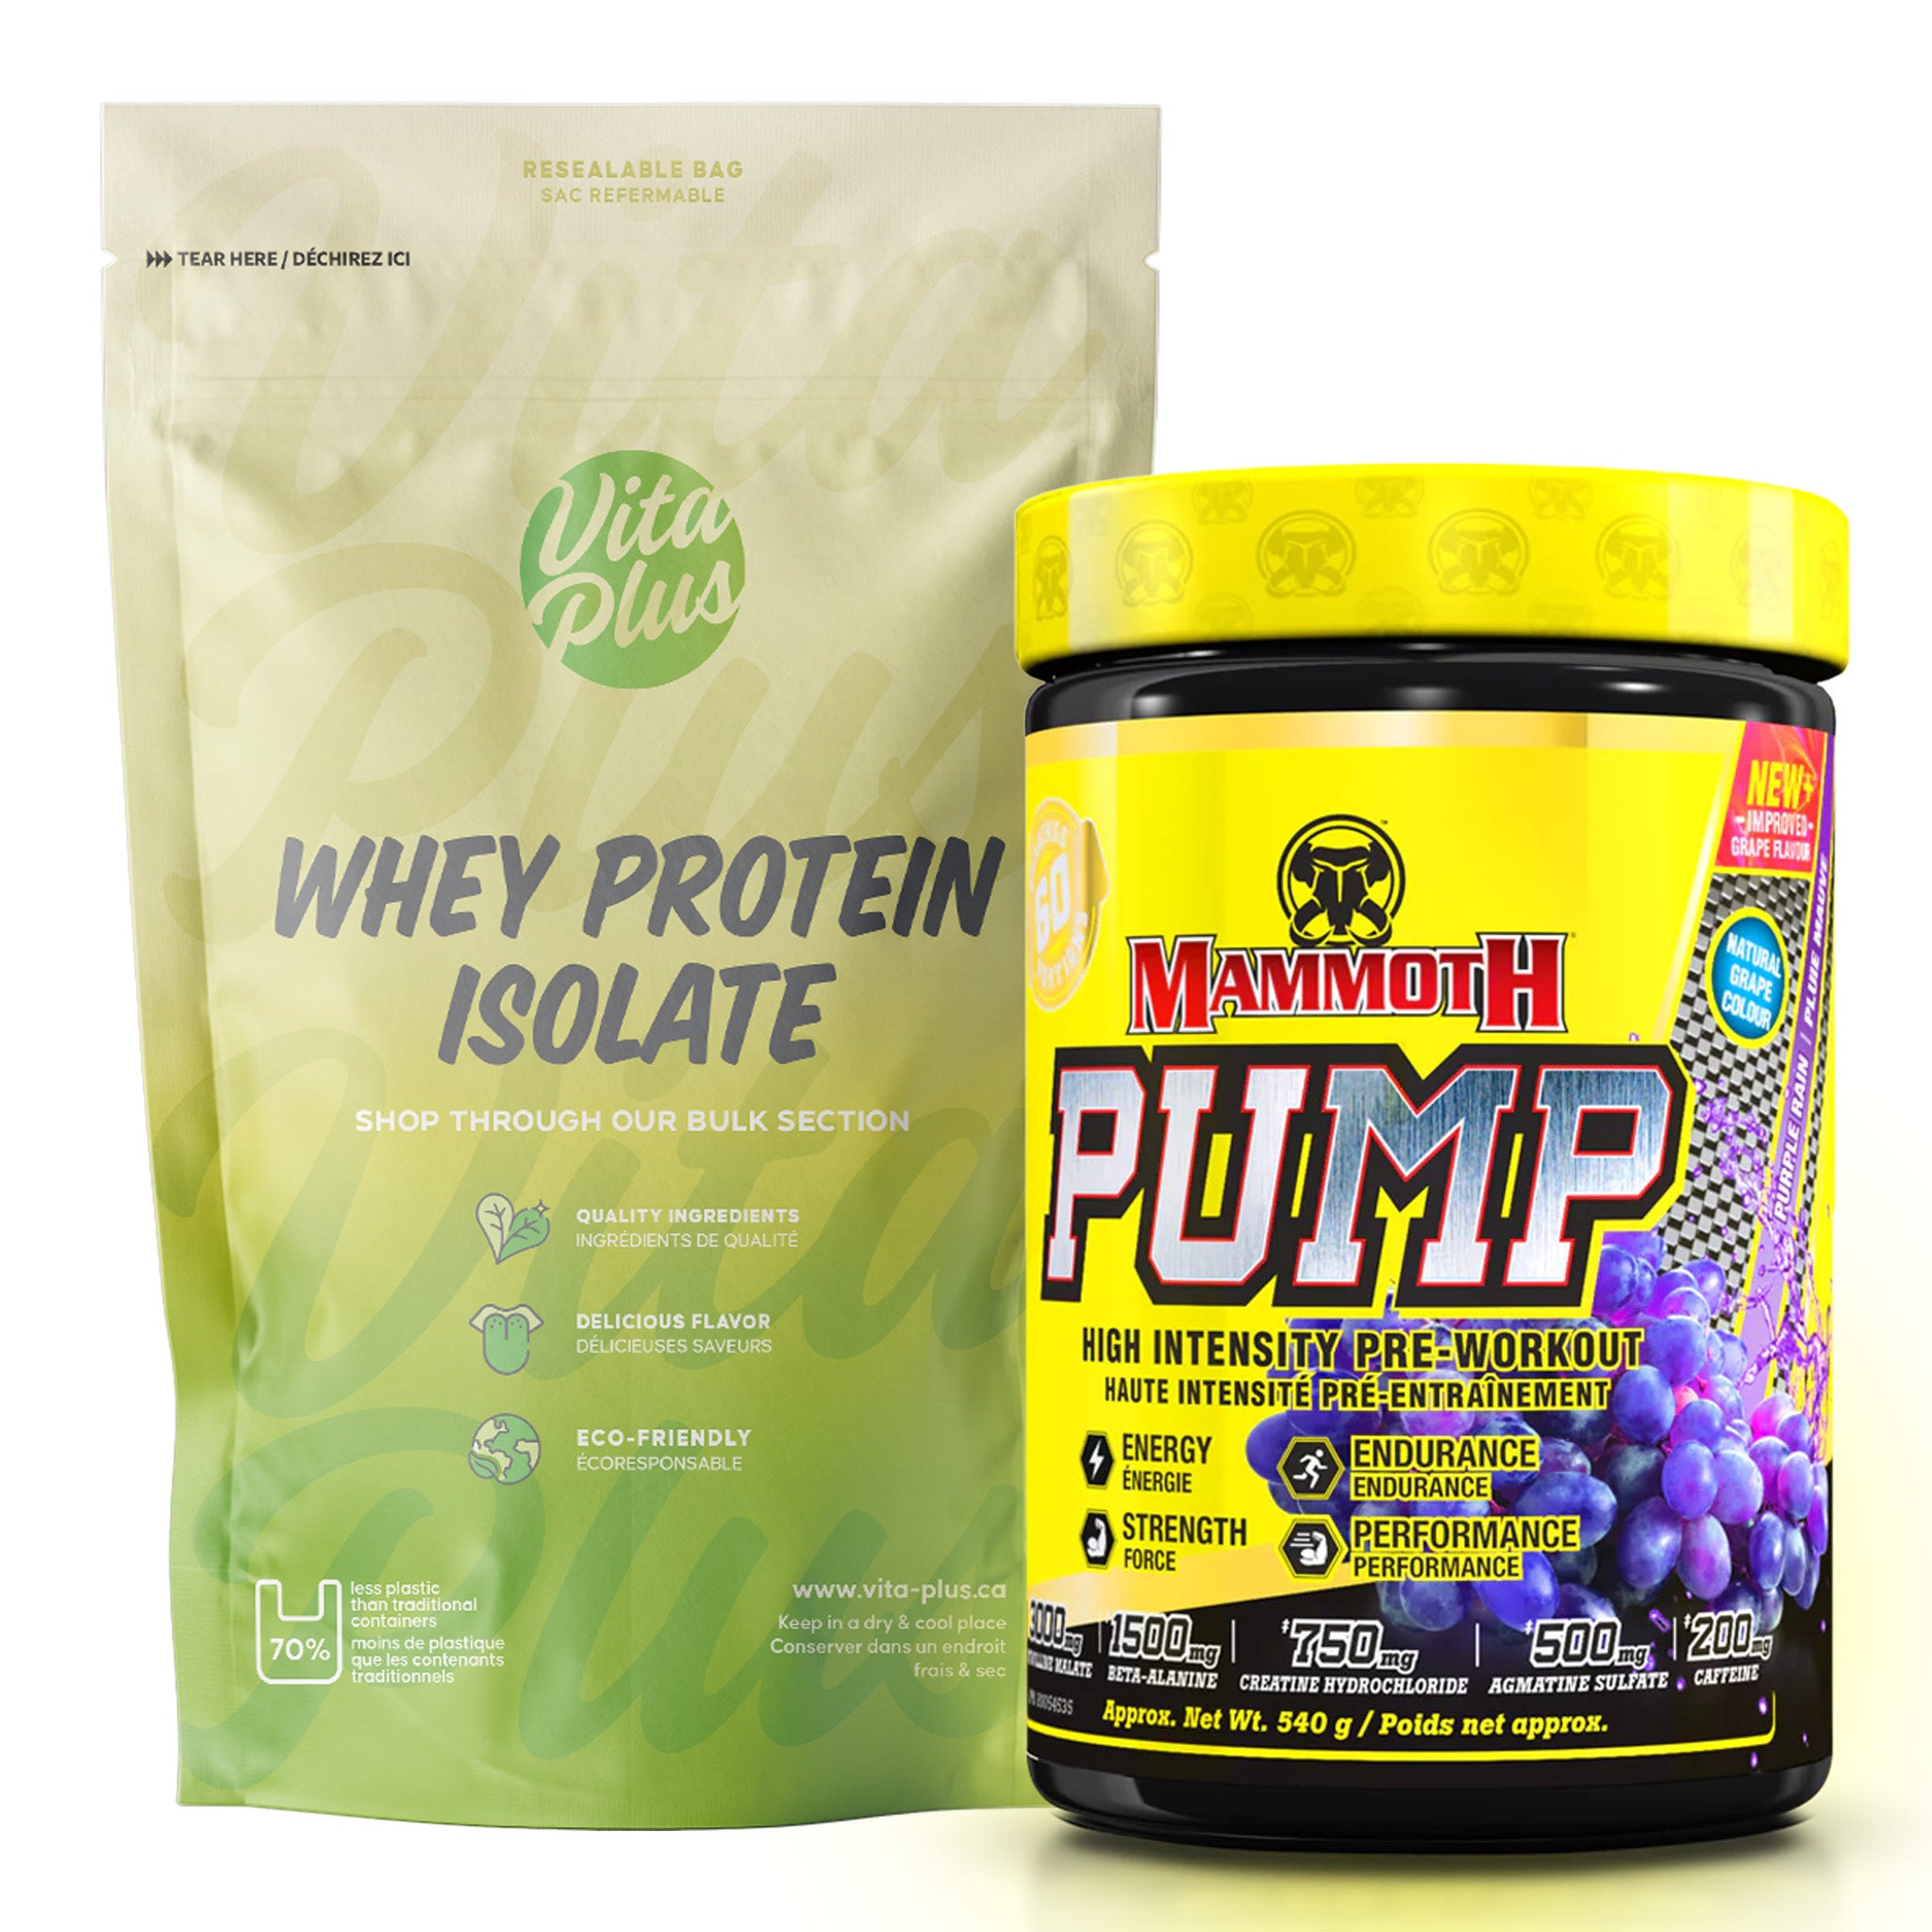 [COMBO] Whey Protein Isolate (5lb) + Mammoth Pump (60 Servings)